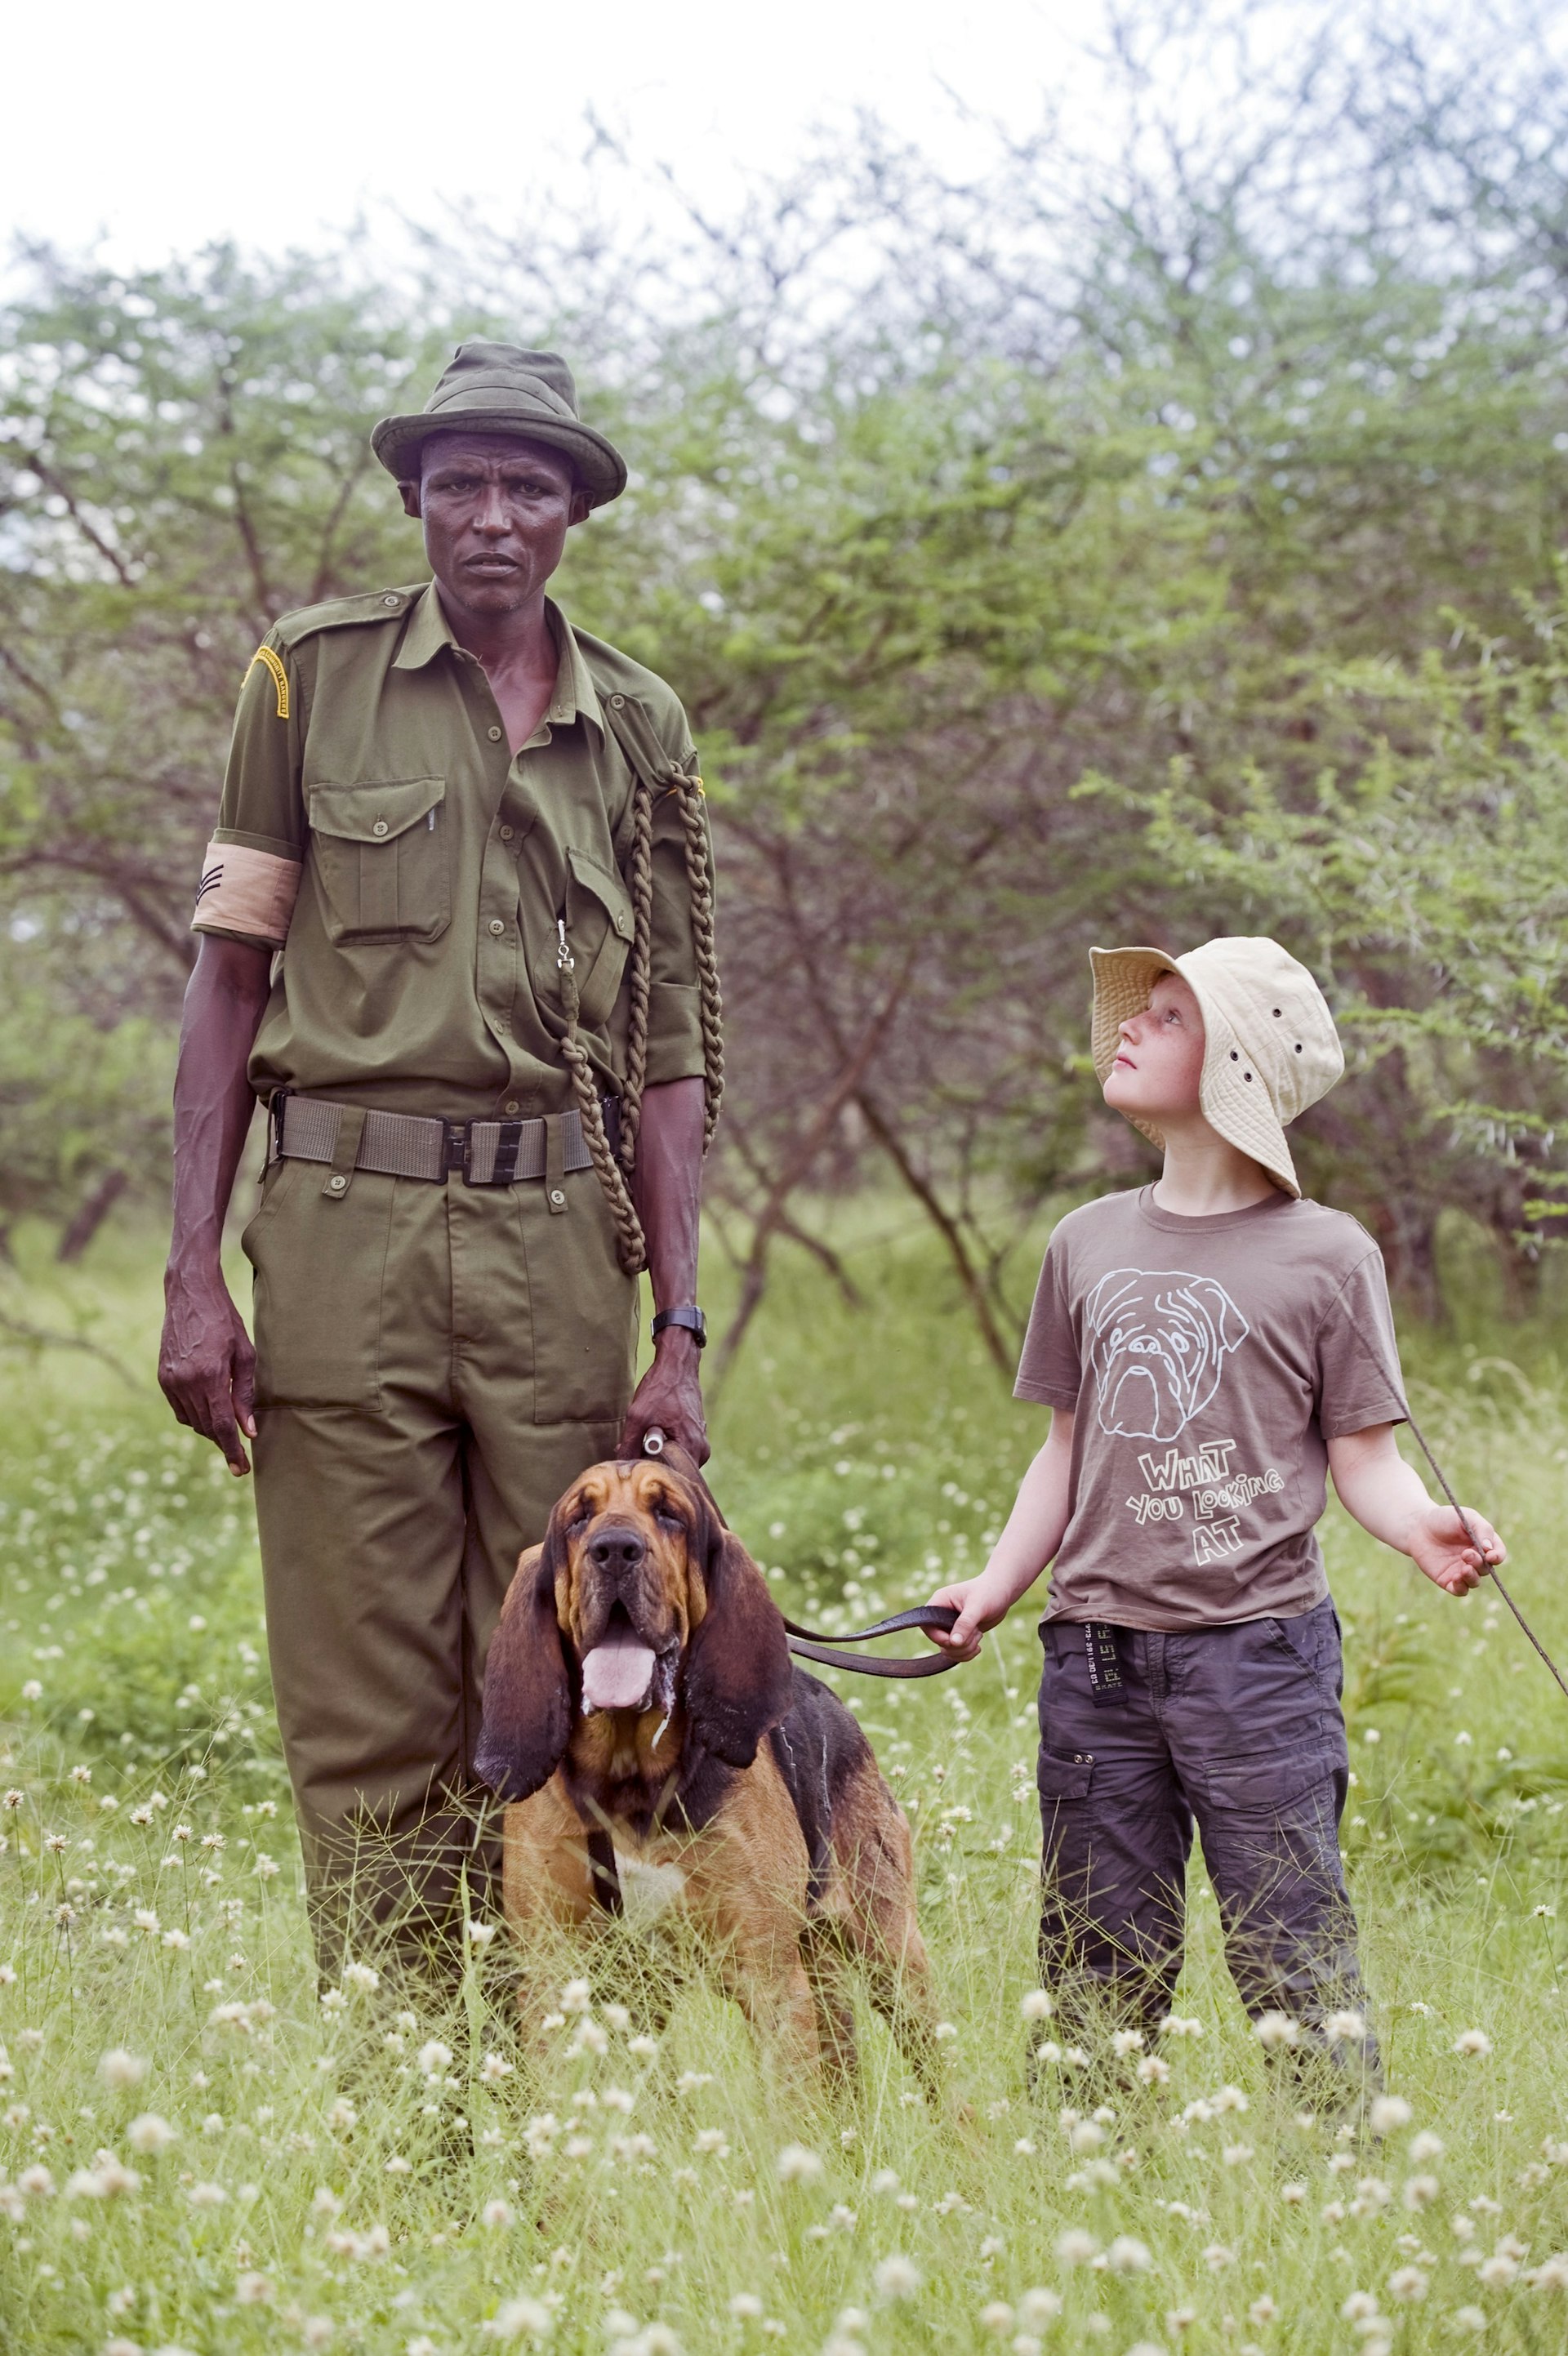 An anti-poaching ranger stands in uniform holding the lead of his bloodhound; a young tourist boy stands next to the dog and looks up to the ranger.